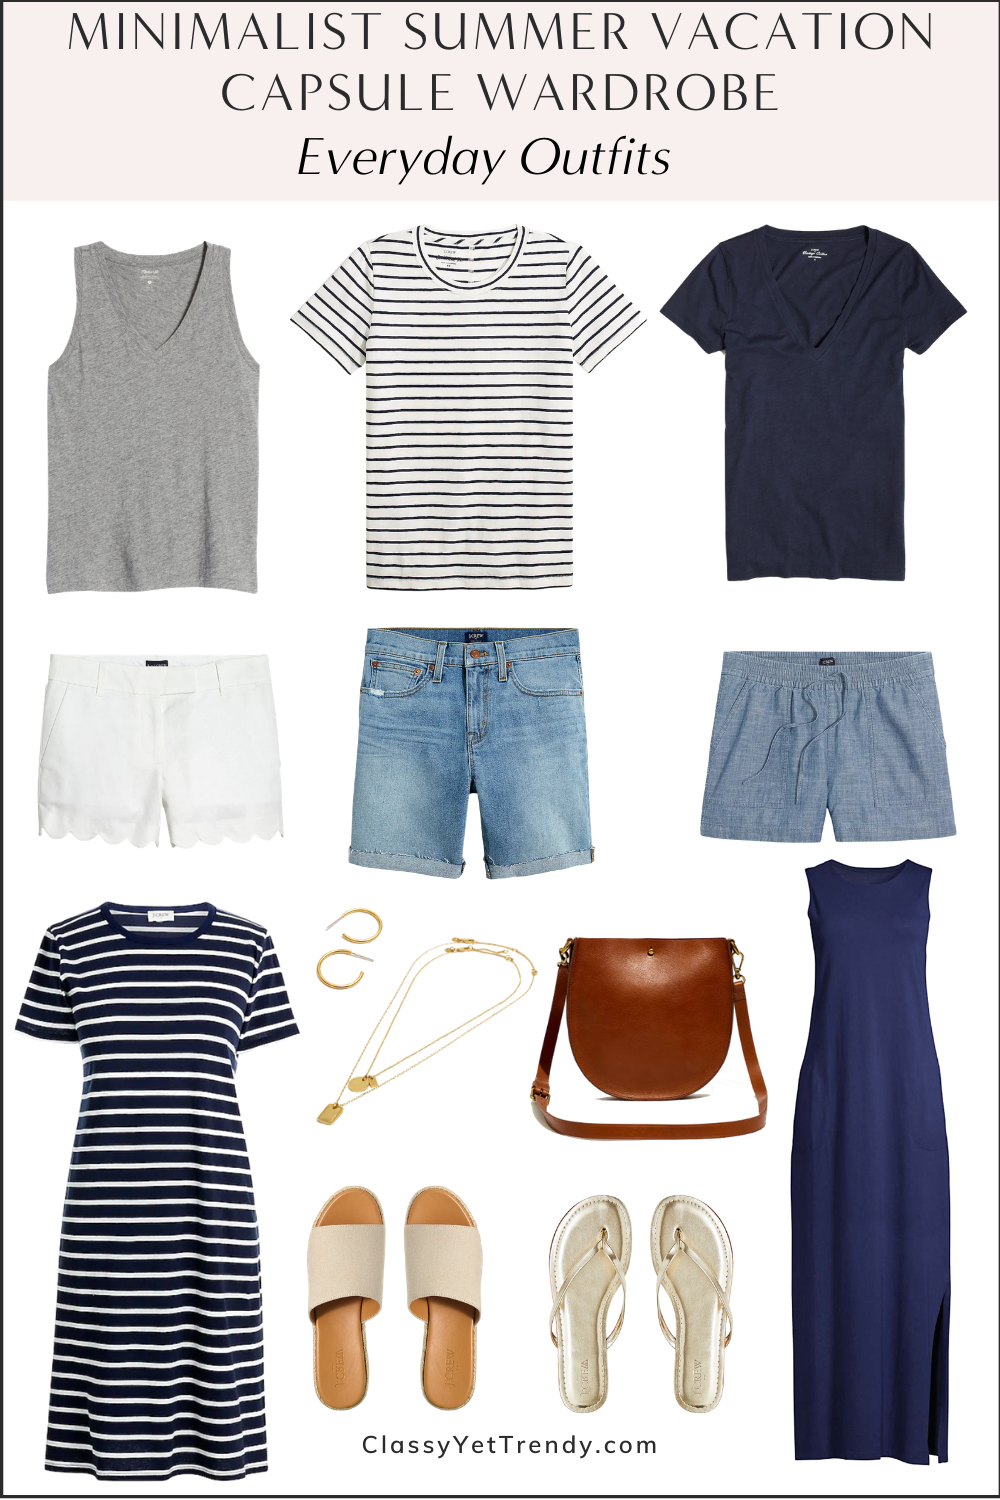 The Essential Capsule Wardrobe: Summer 2021 Collection - Classy Yet Trendy